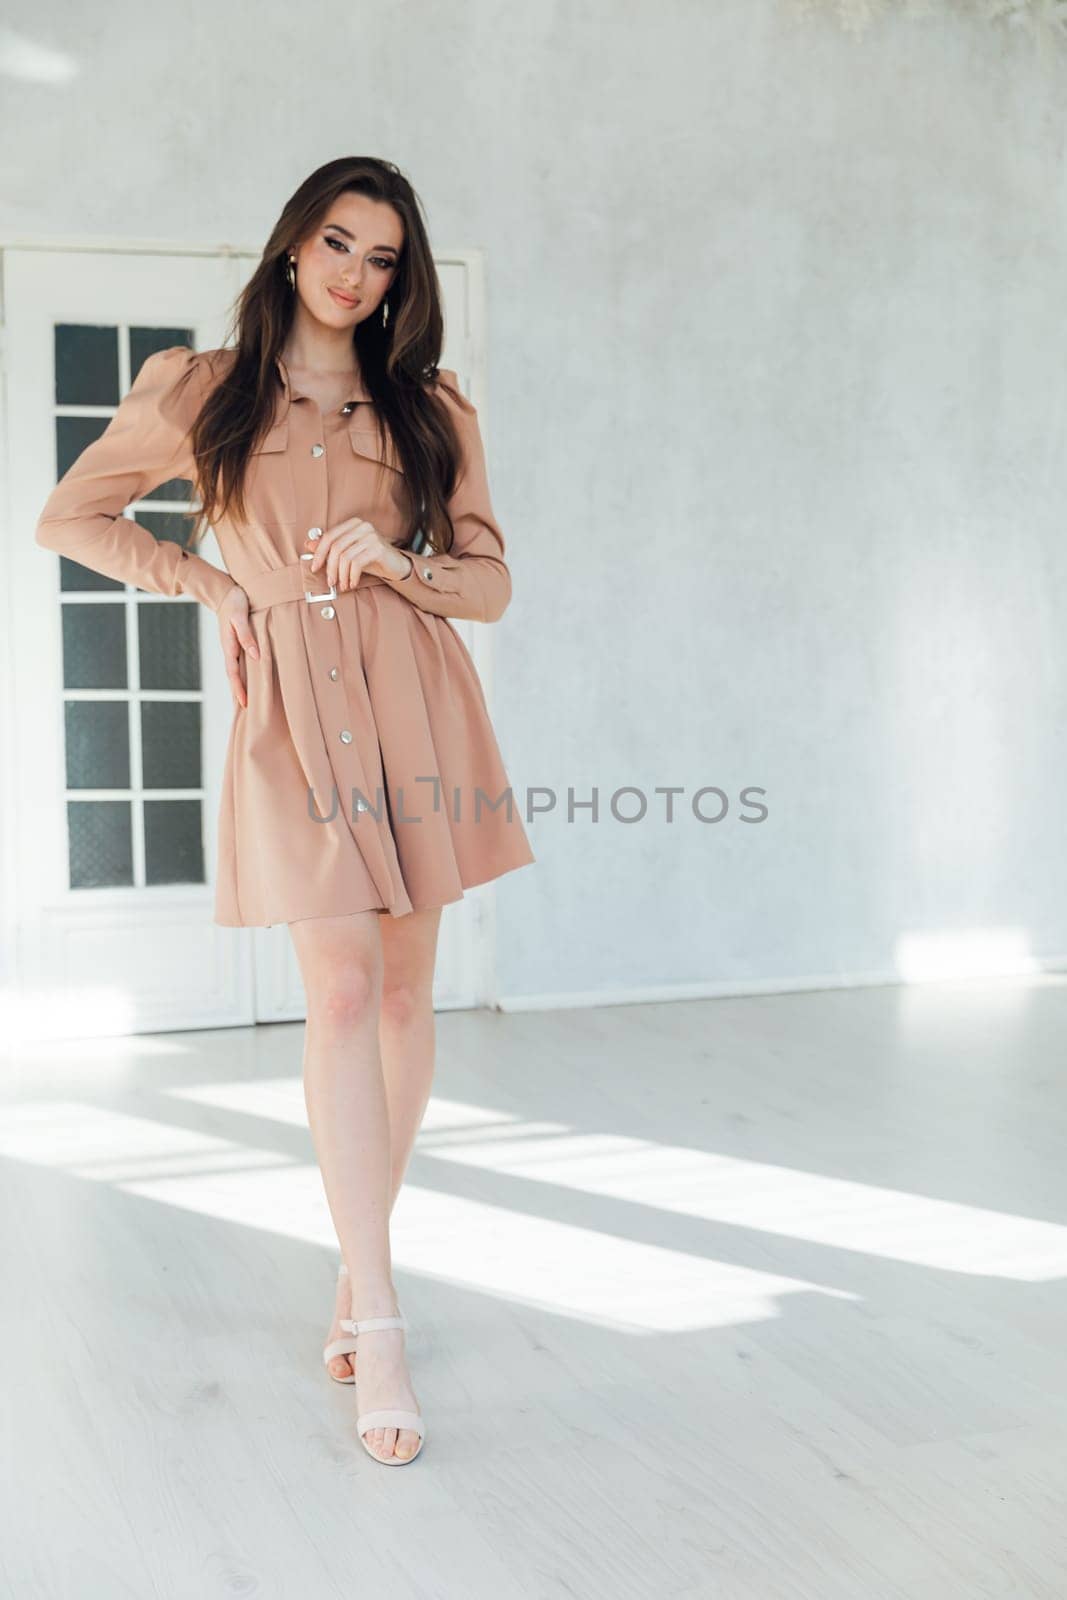 beautiful woman in a dress in a bright room on white background